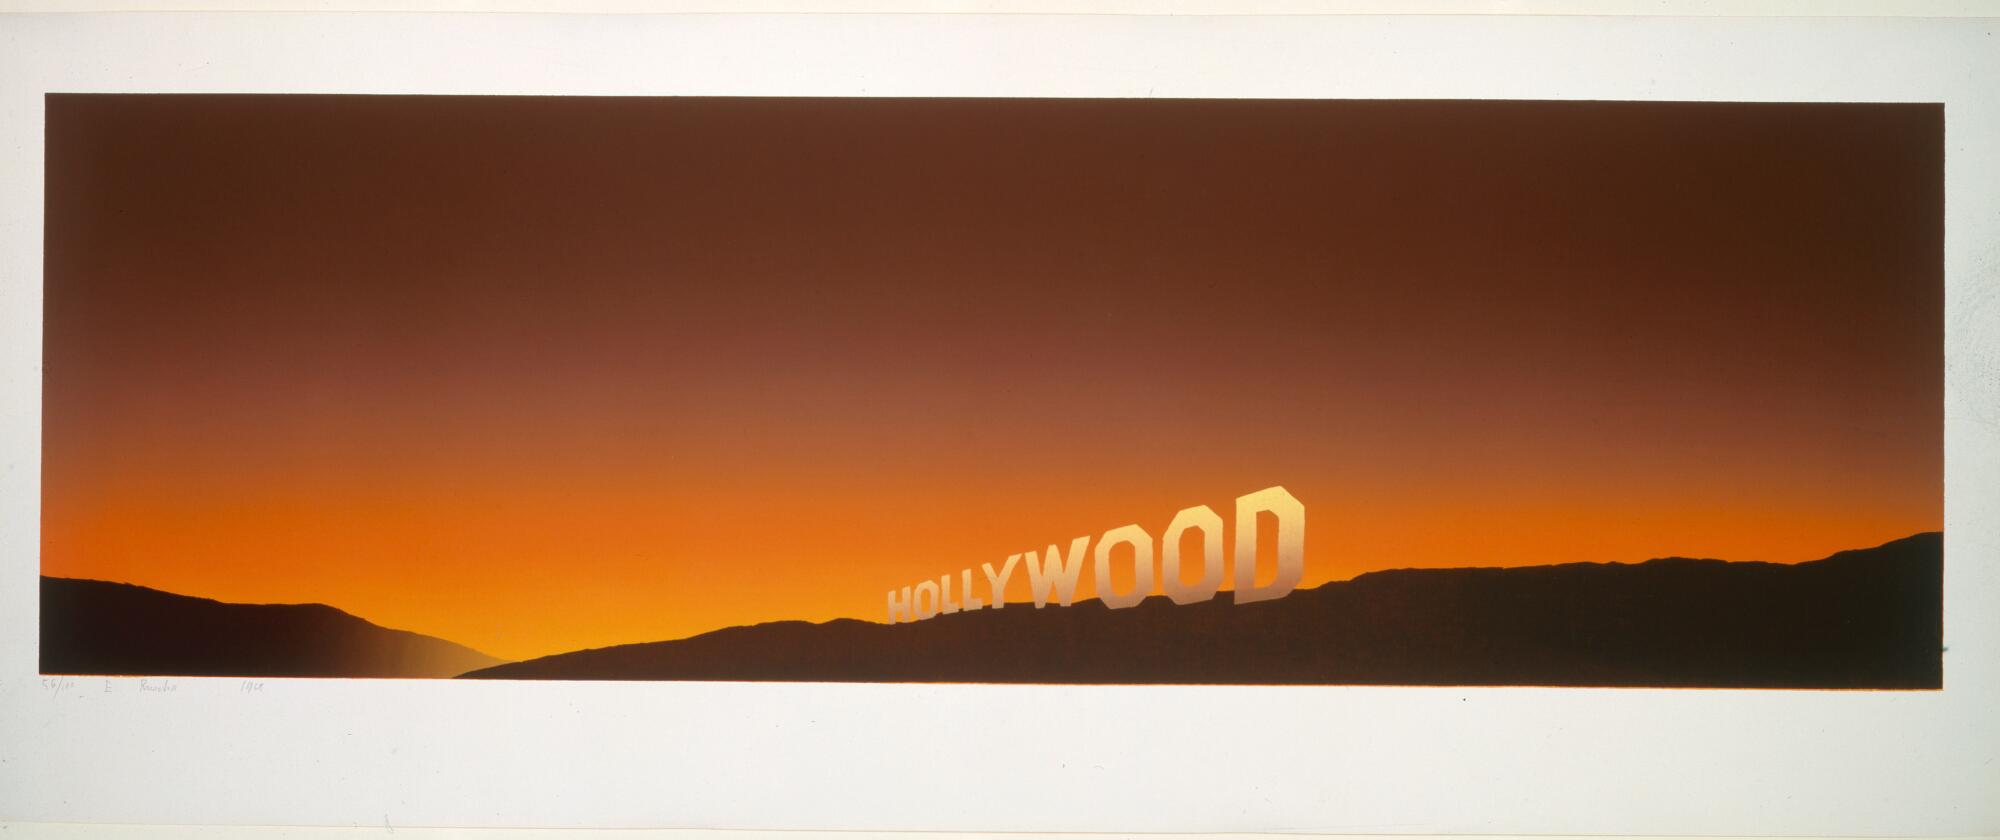 Panneau Hollywood Ed Ruscha, Hollywood, 1968, Los Angeles County Museum of Art, Museum Acquisition Fund, © Ed Ruscha, photo